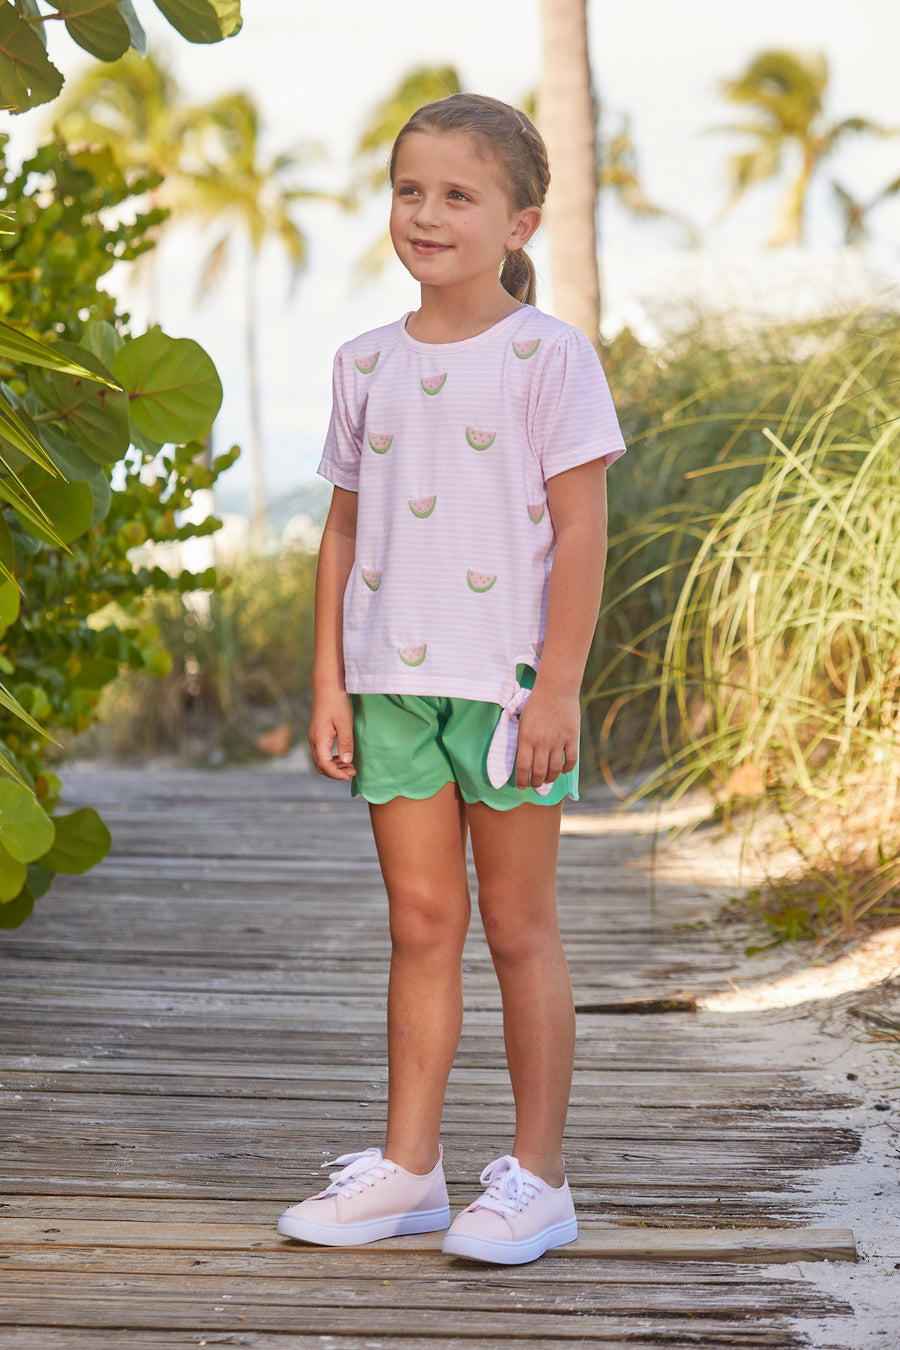 Little English classic children's clothing, girl's elastic waist shorts with scallop hem in green twill